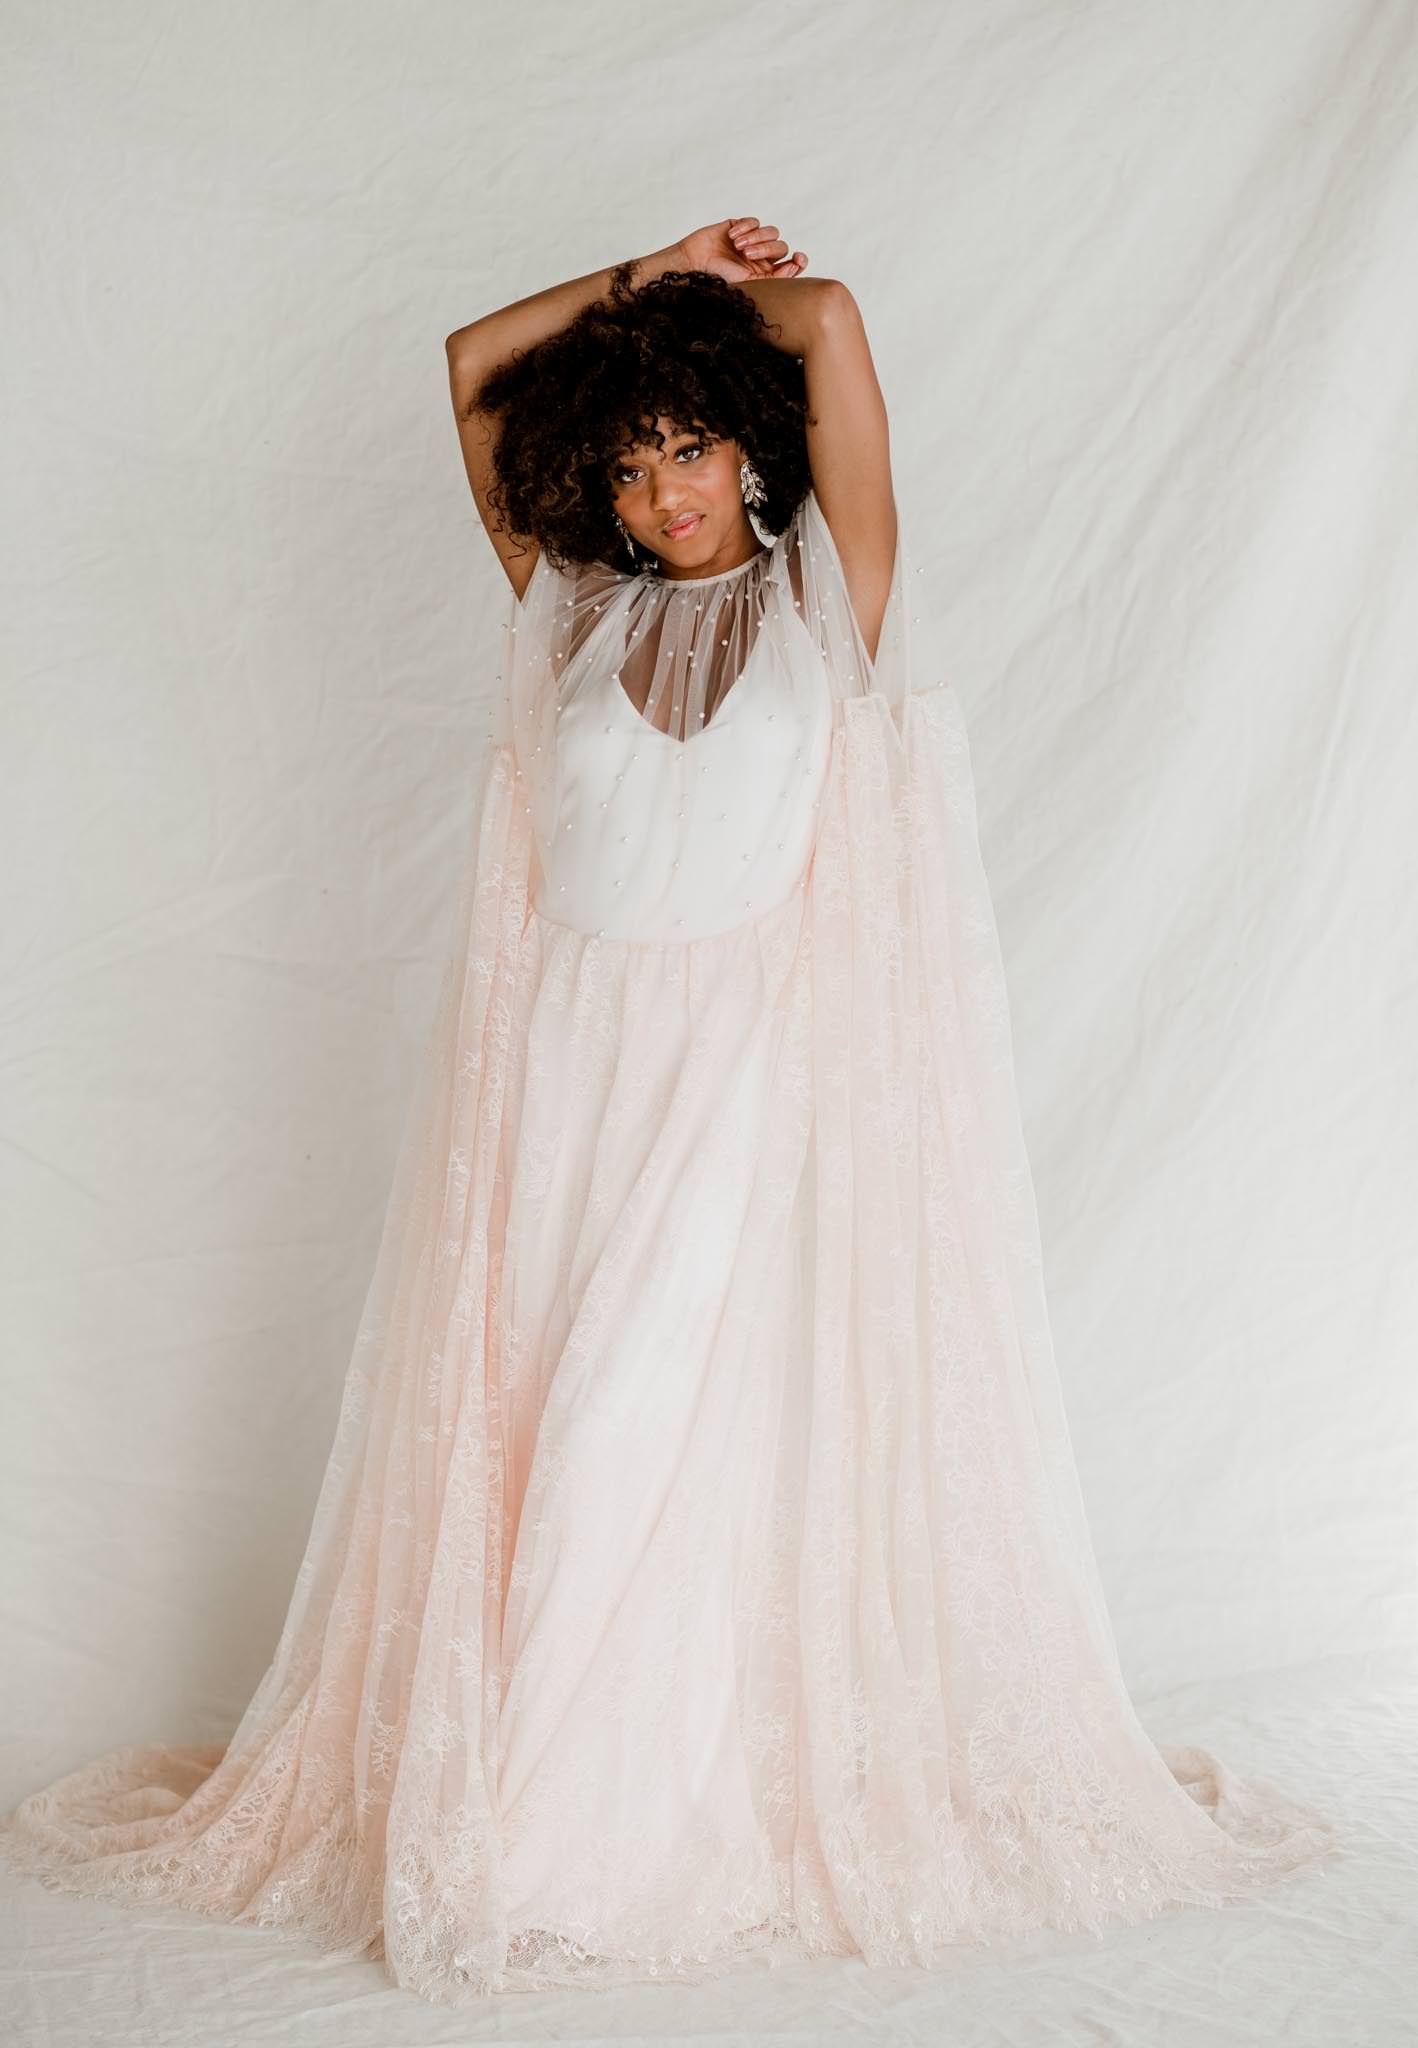 Pale pink lace and pearl mesh designer gown for photographers styled shoot wedding Dress Rental company Rented by Claire LaFaye_Pretty in Pink